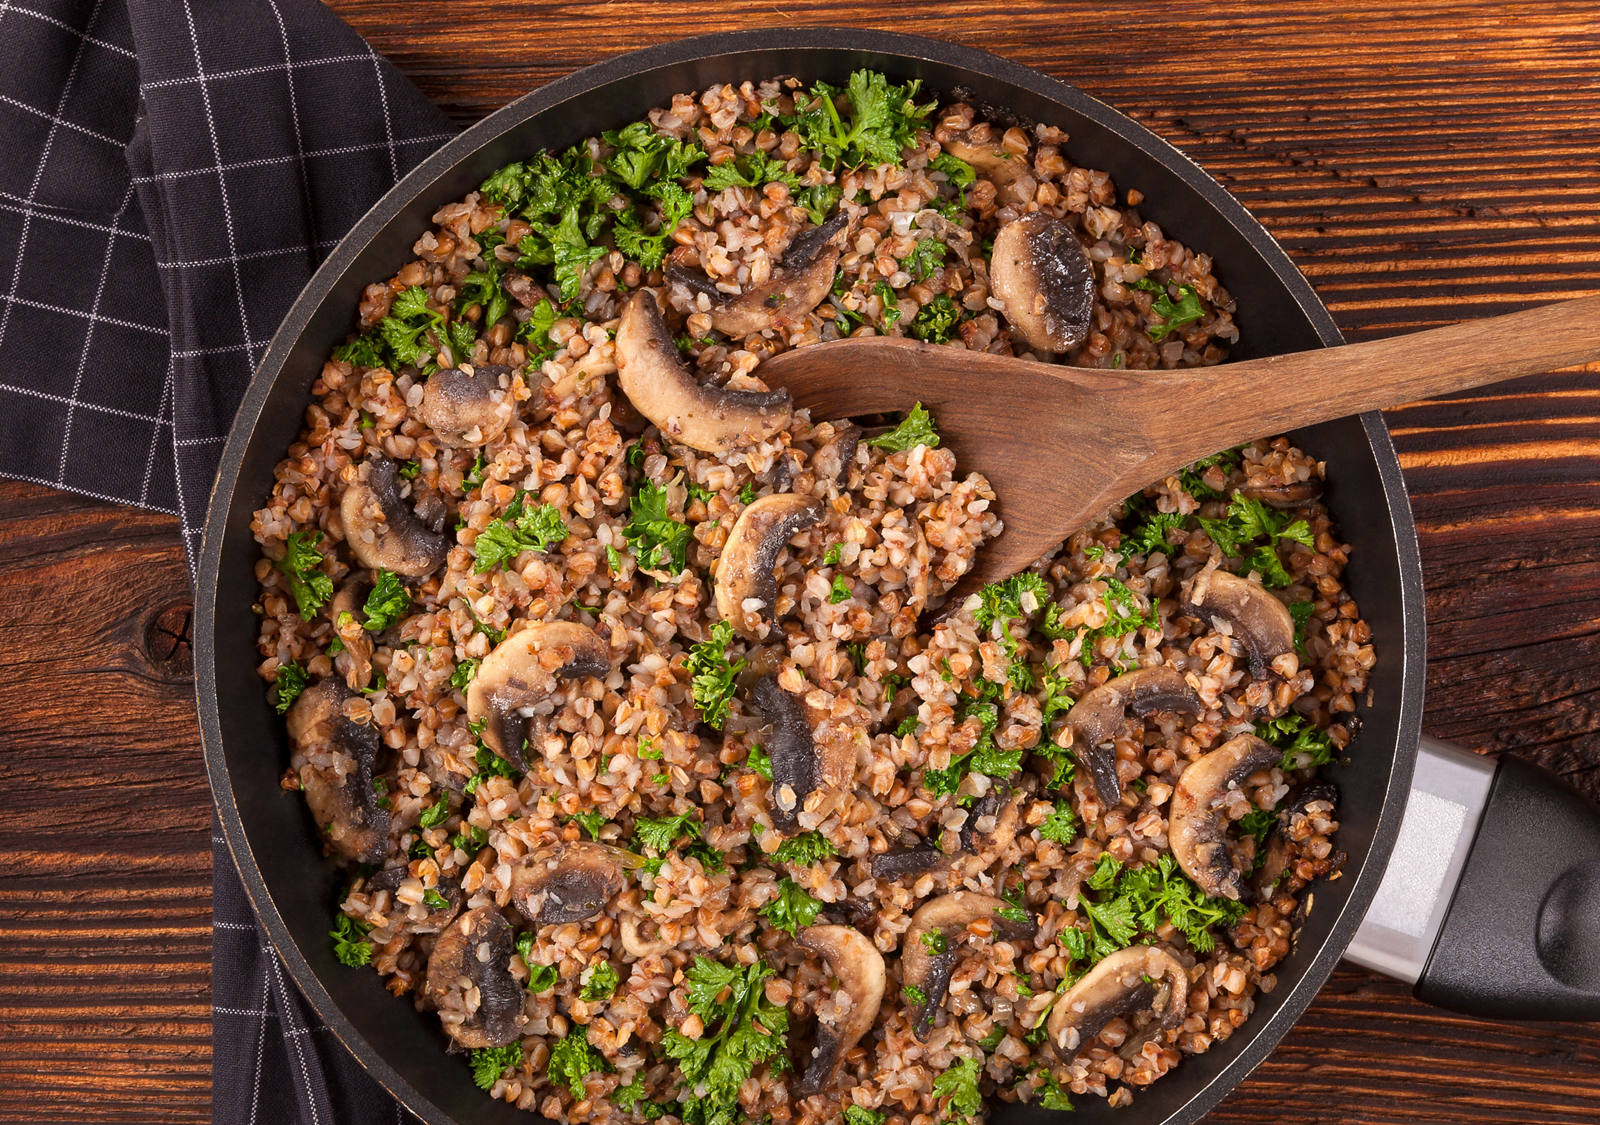 Superfood: buckwheat risotto with mushrooms